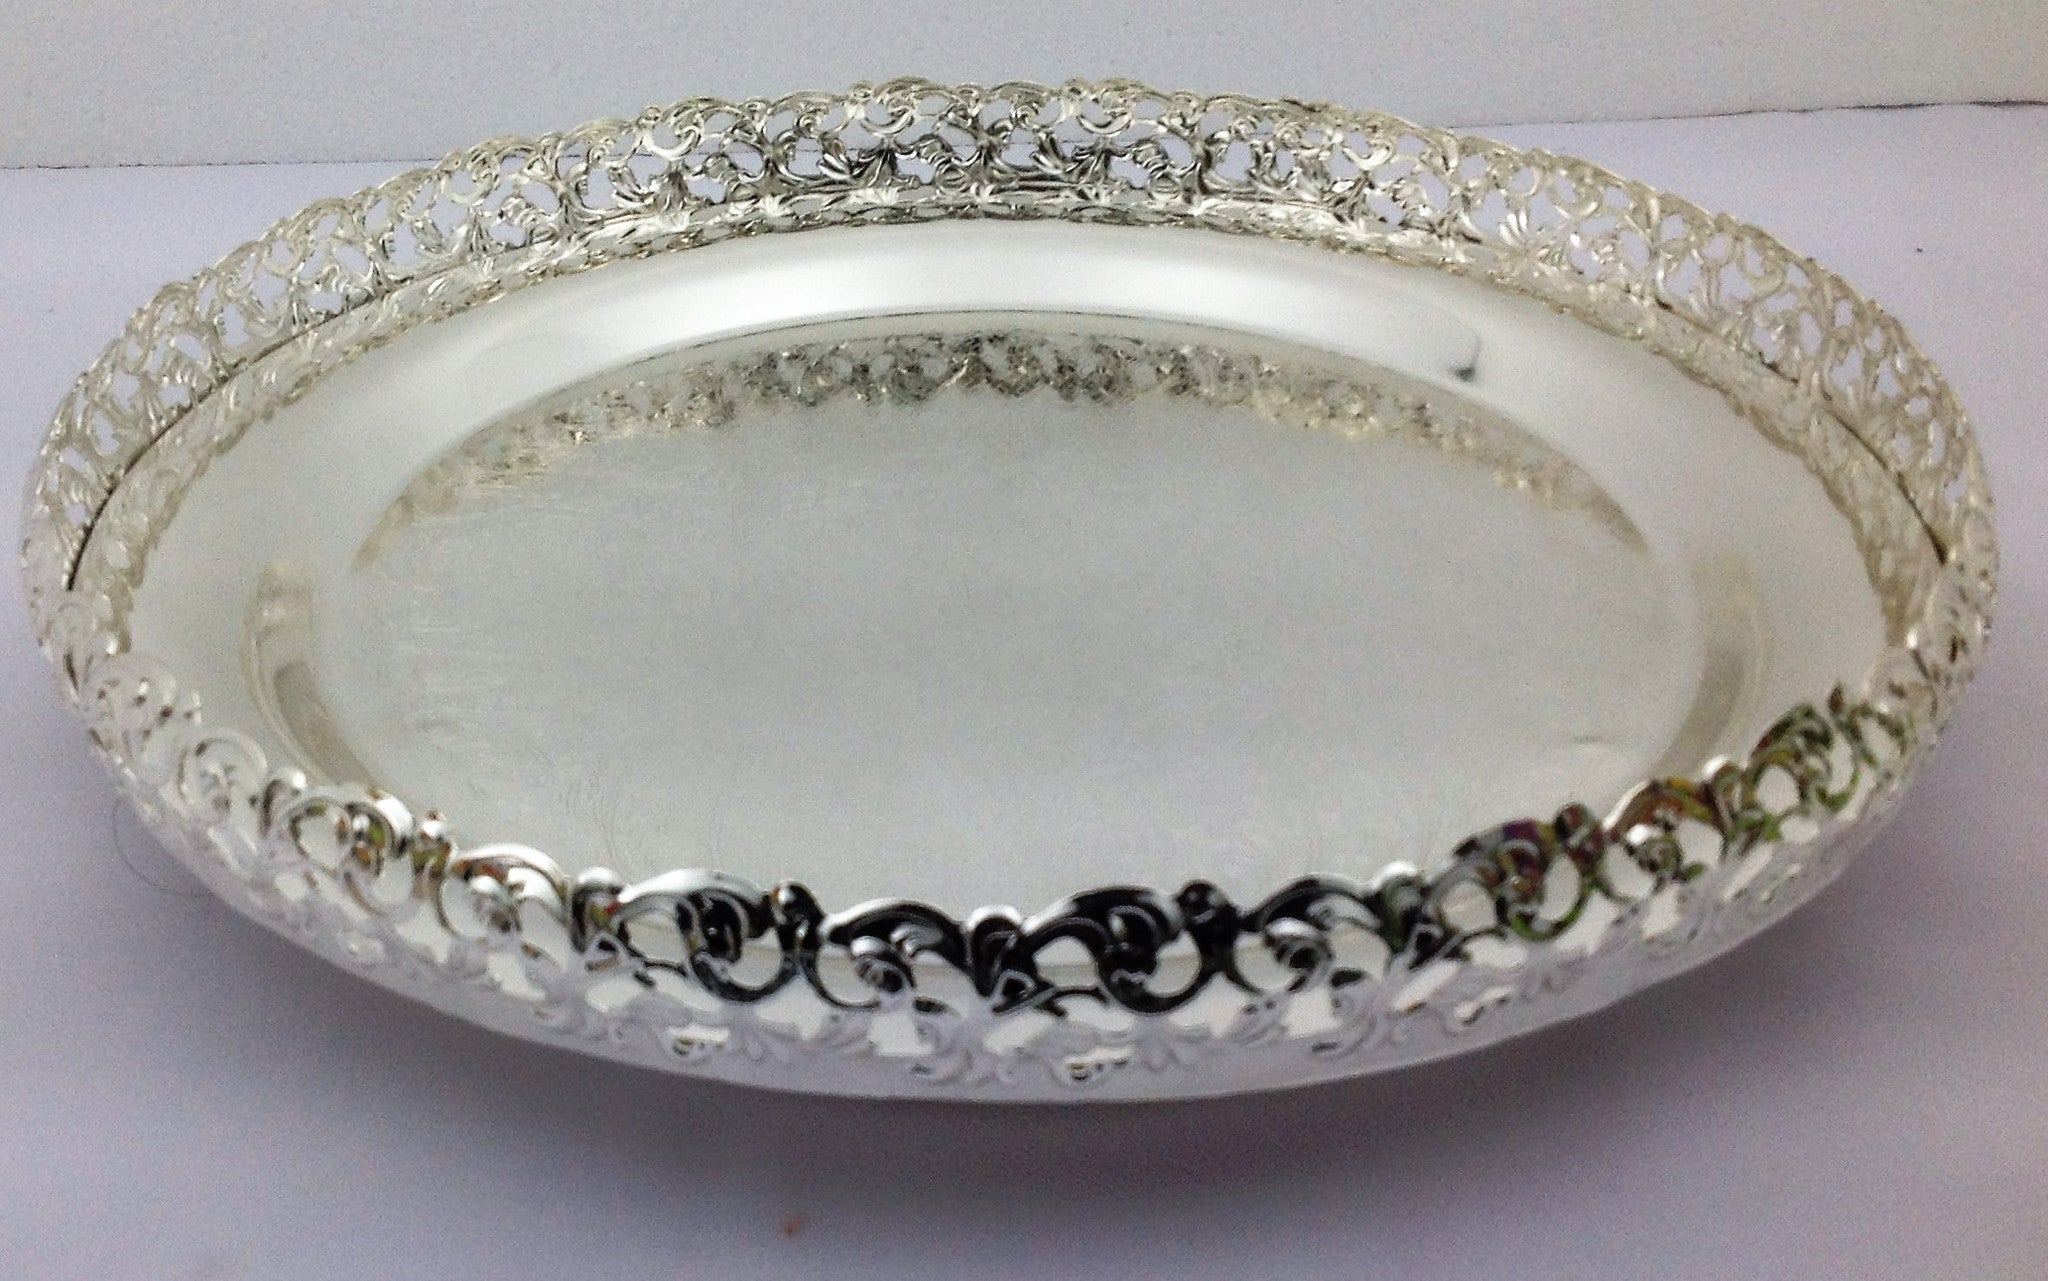 SAT 2003 - Silver Coated Floral Design Round Plate